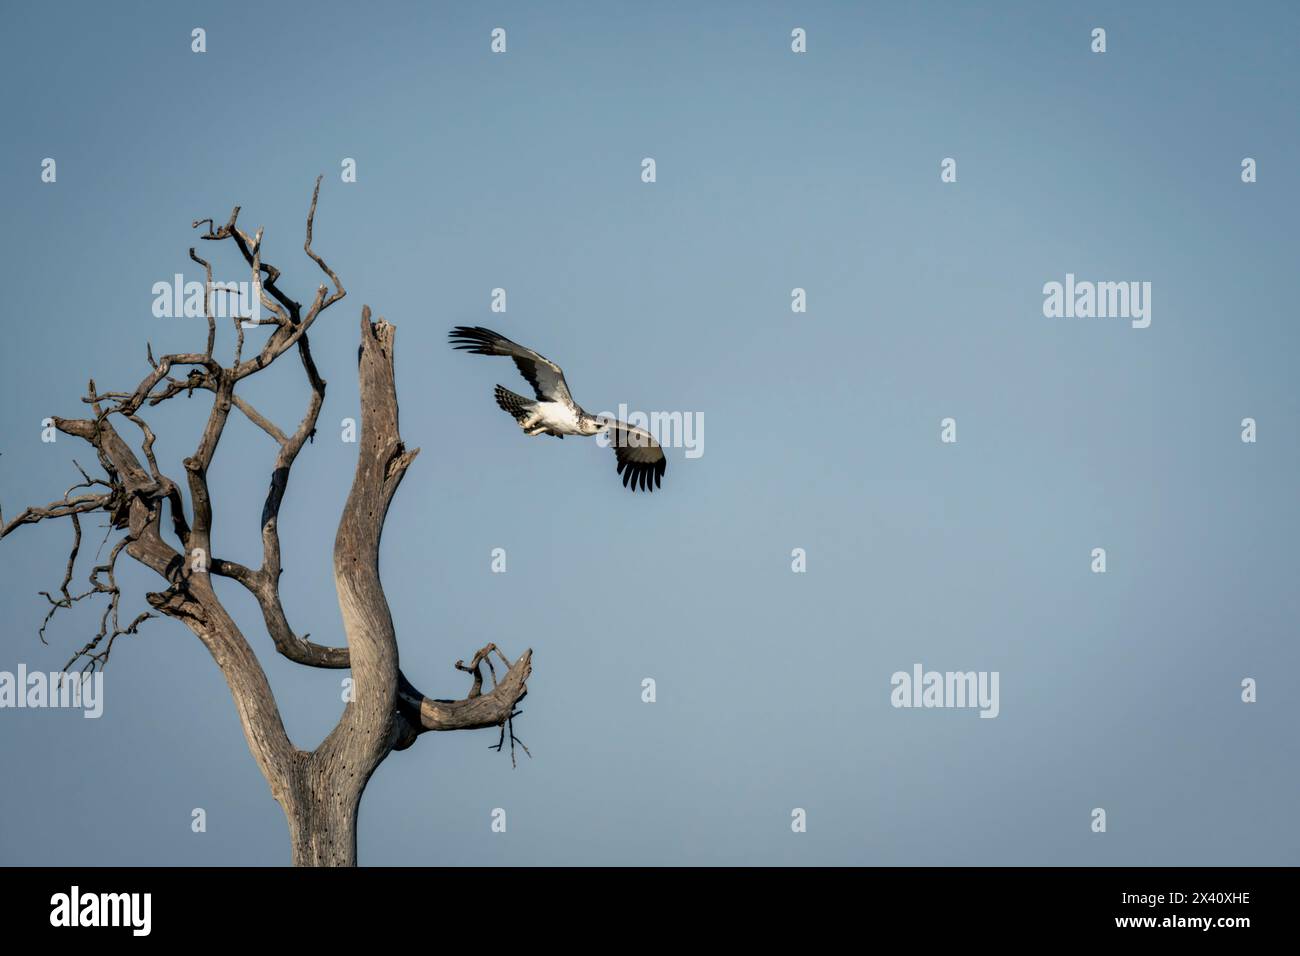 Juvenile martial eagle flies away from tree Stock Photo